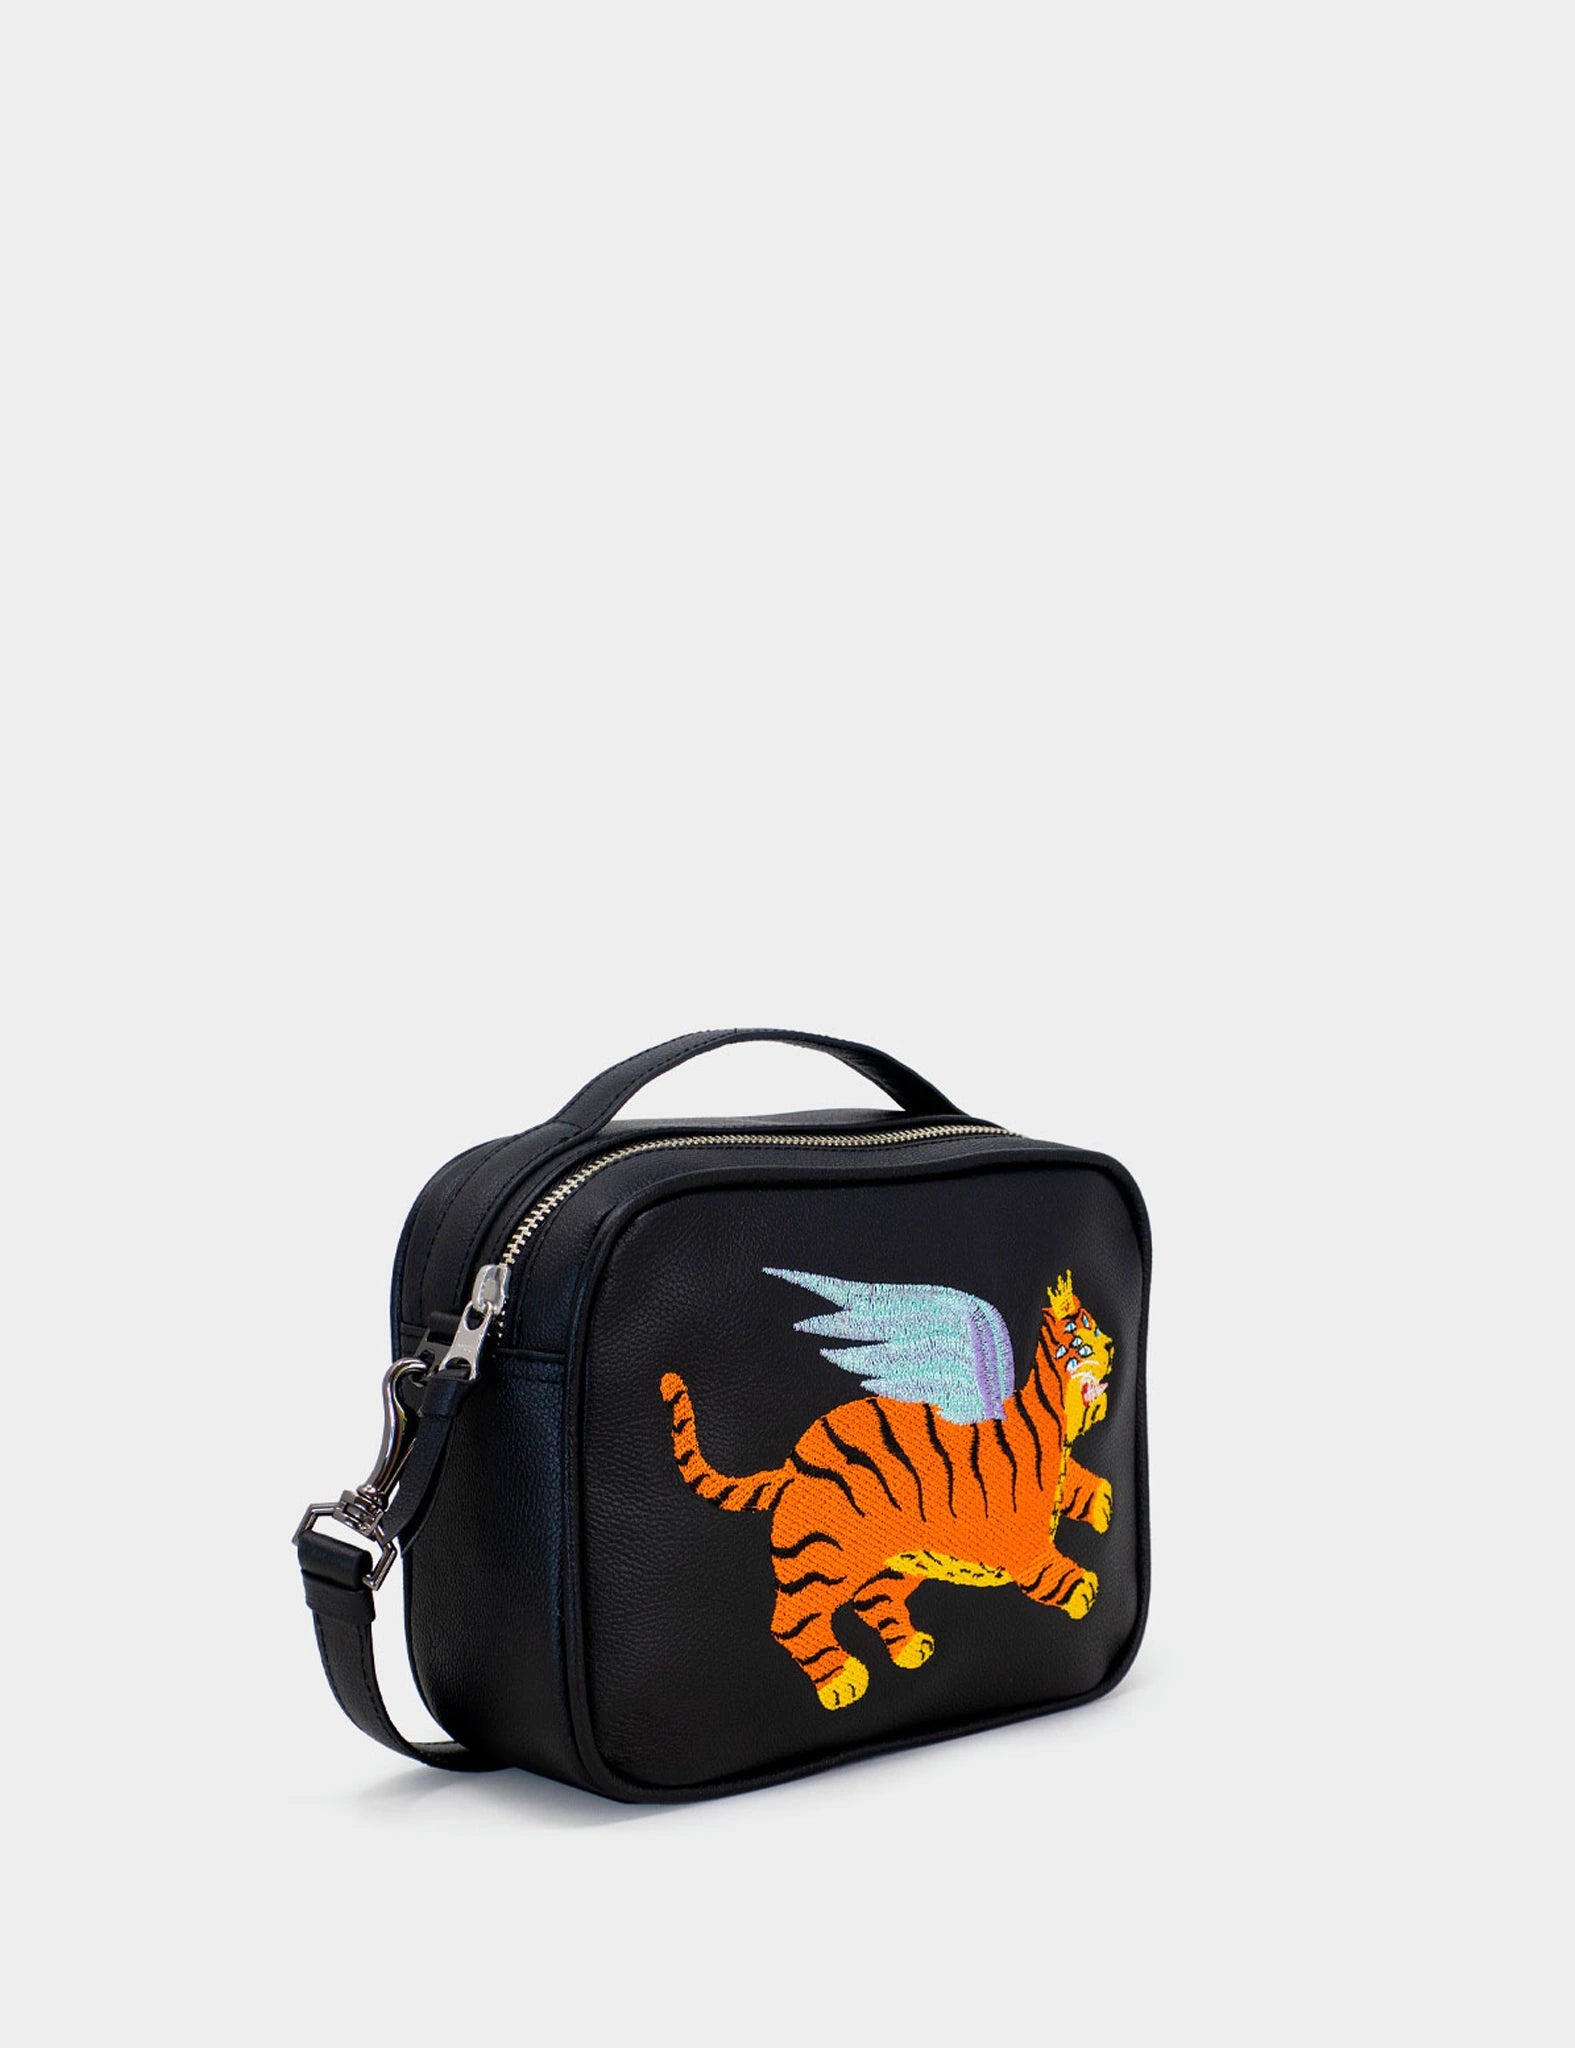 Black Leather Box Bag: Tiger Wings Embroidery | NYC Slow Fashion